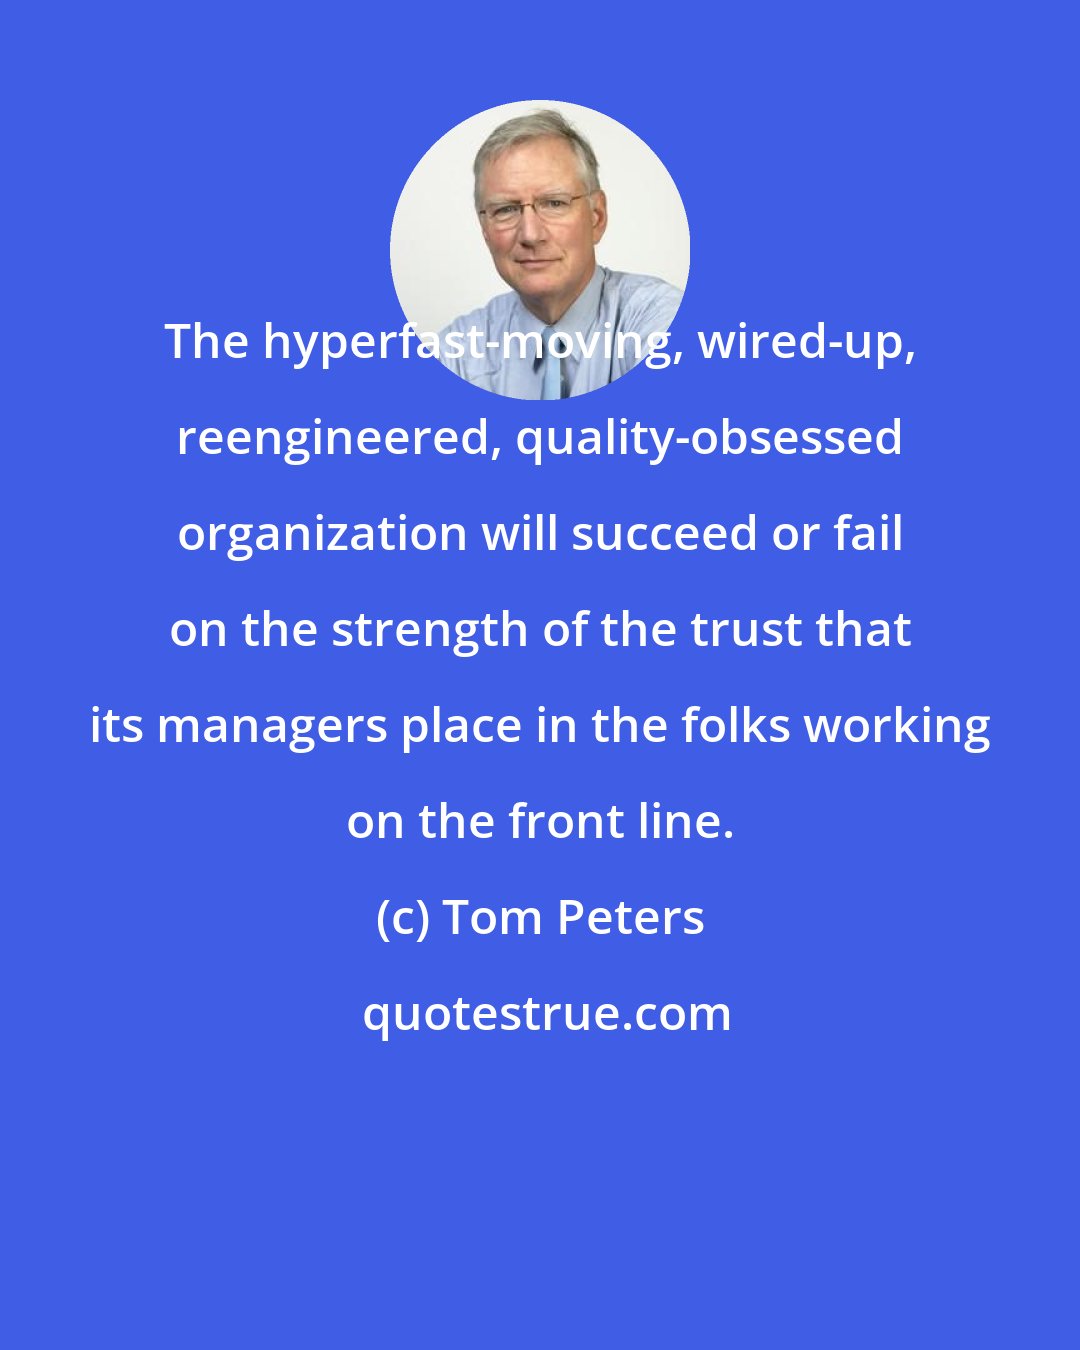 Tom Peters: The hyperfast-moving, wired-up, reengineered, quality-obsessed organization will succeed or fail on the strength of the trust that its managers place in the folks working on the front line.